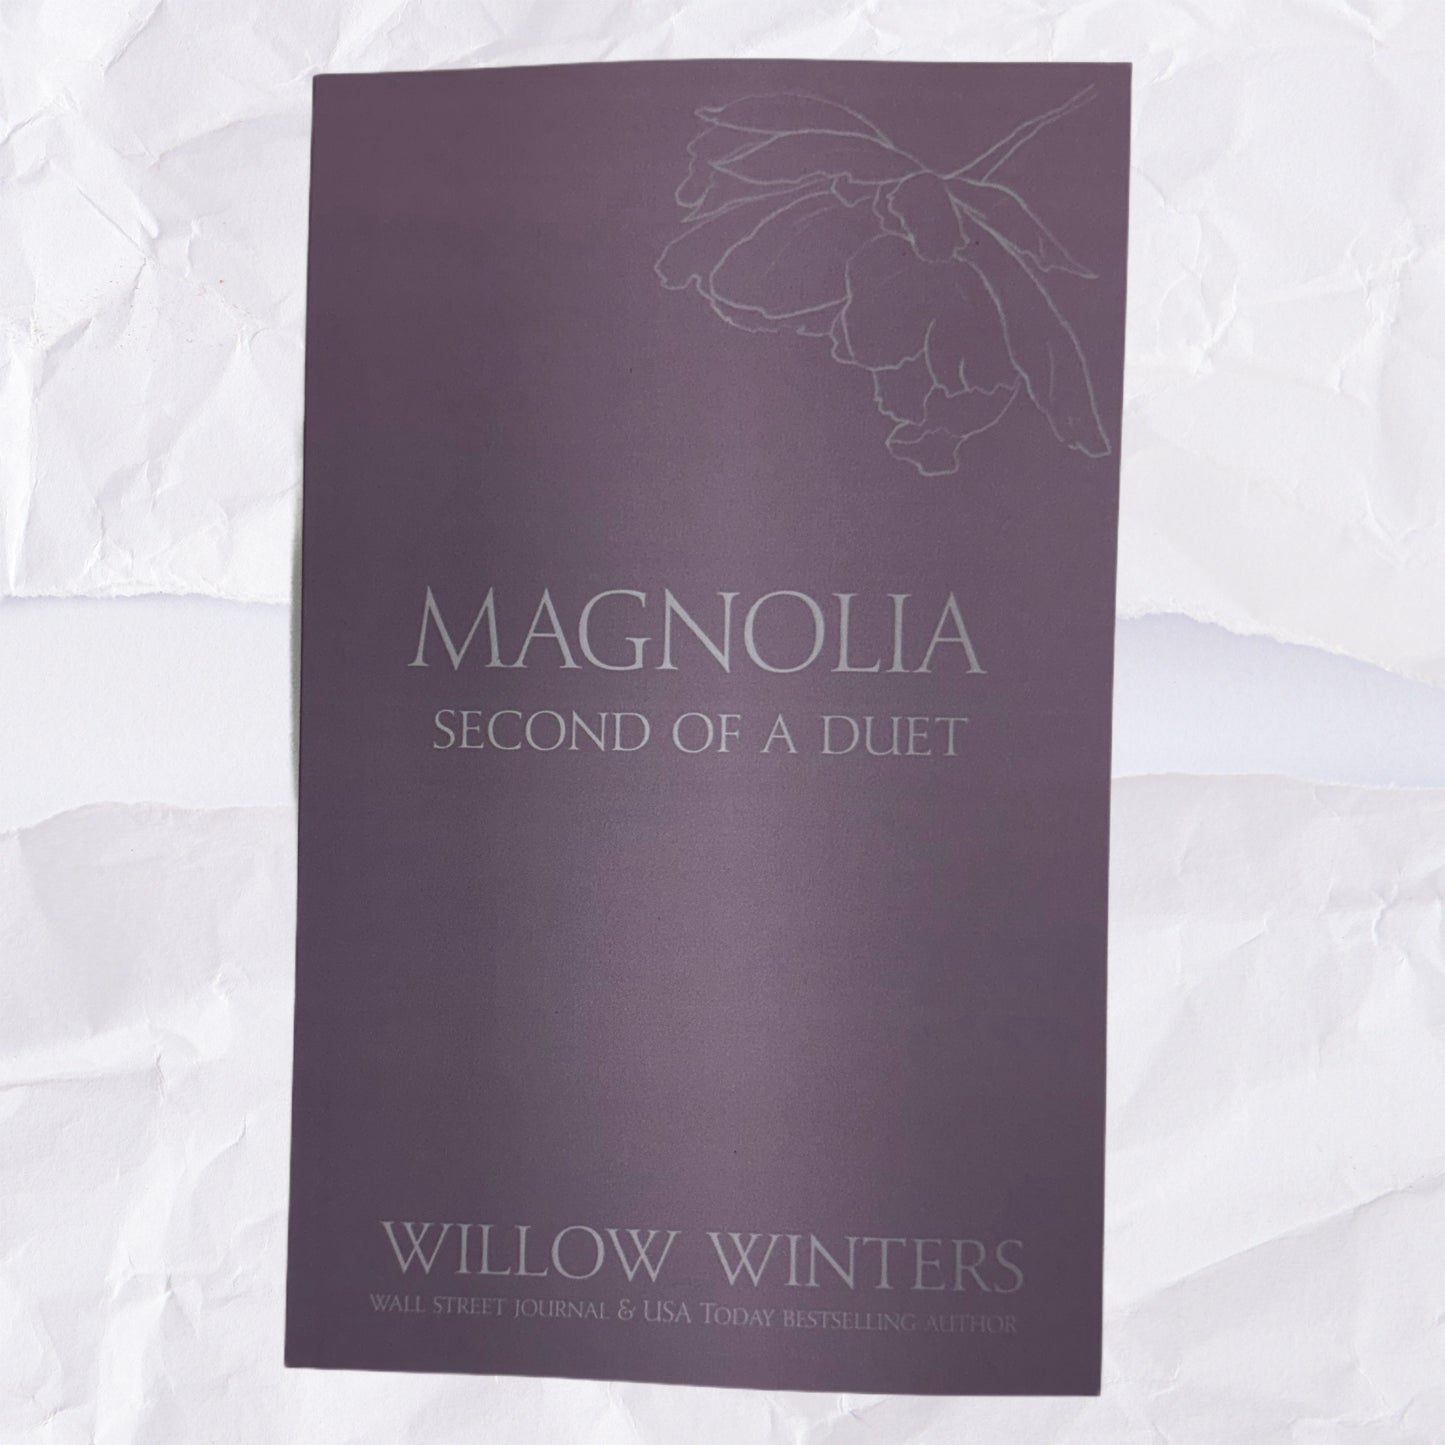 21) Magnolia - Second of a Duet: Discreet Series by Willow Winters